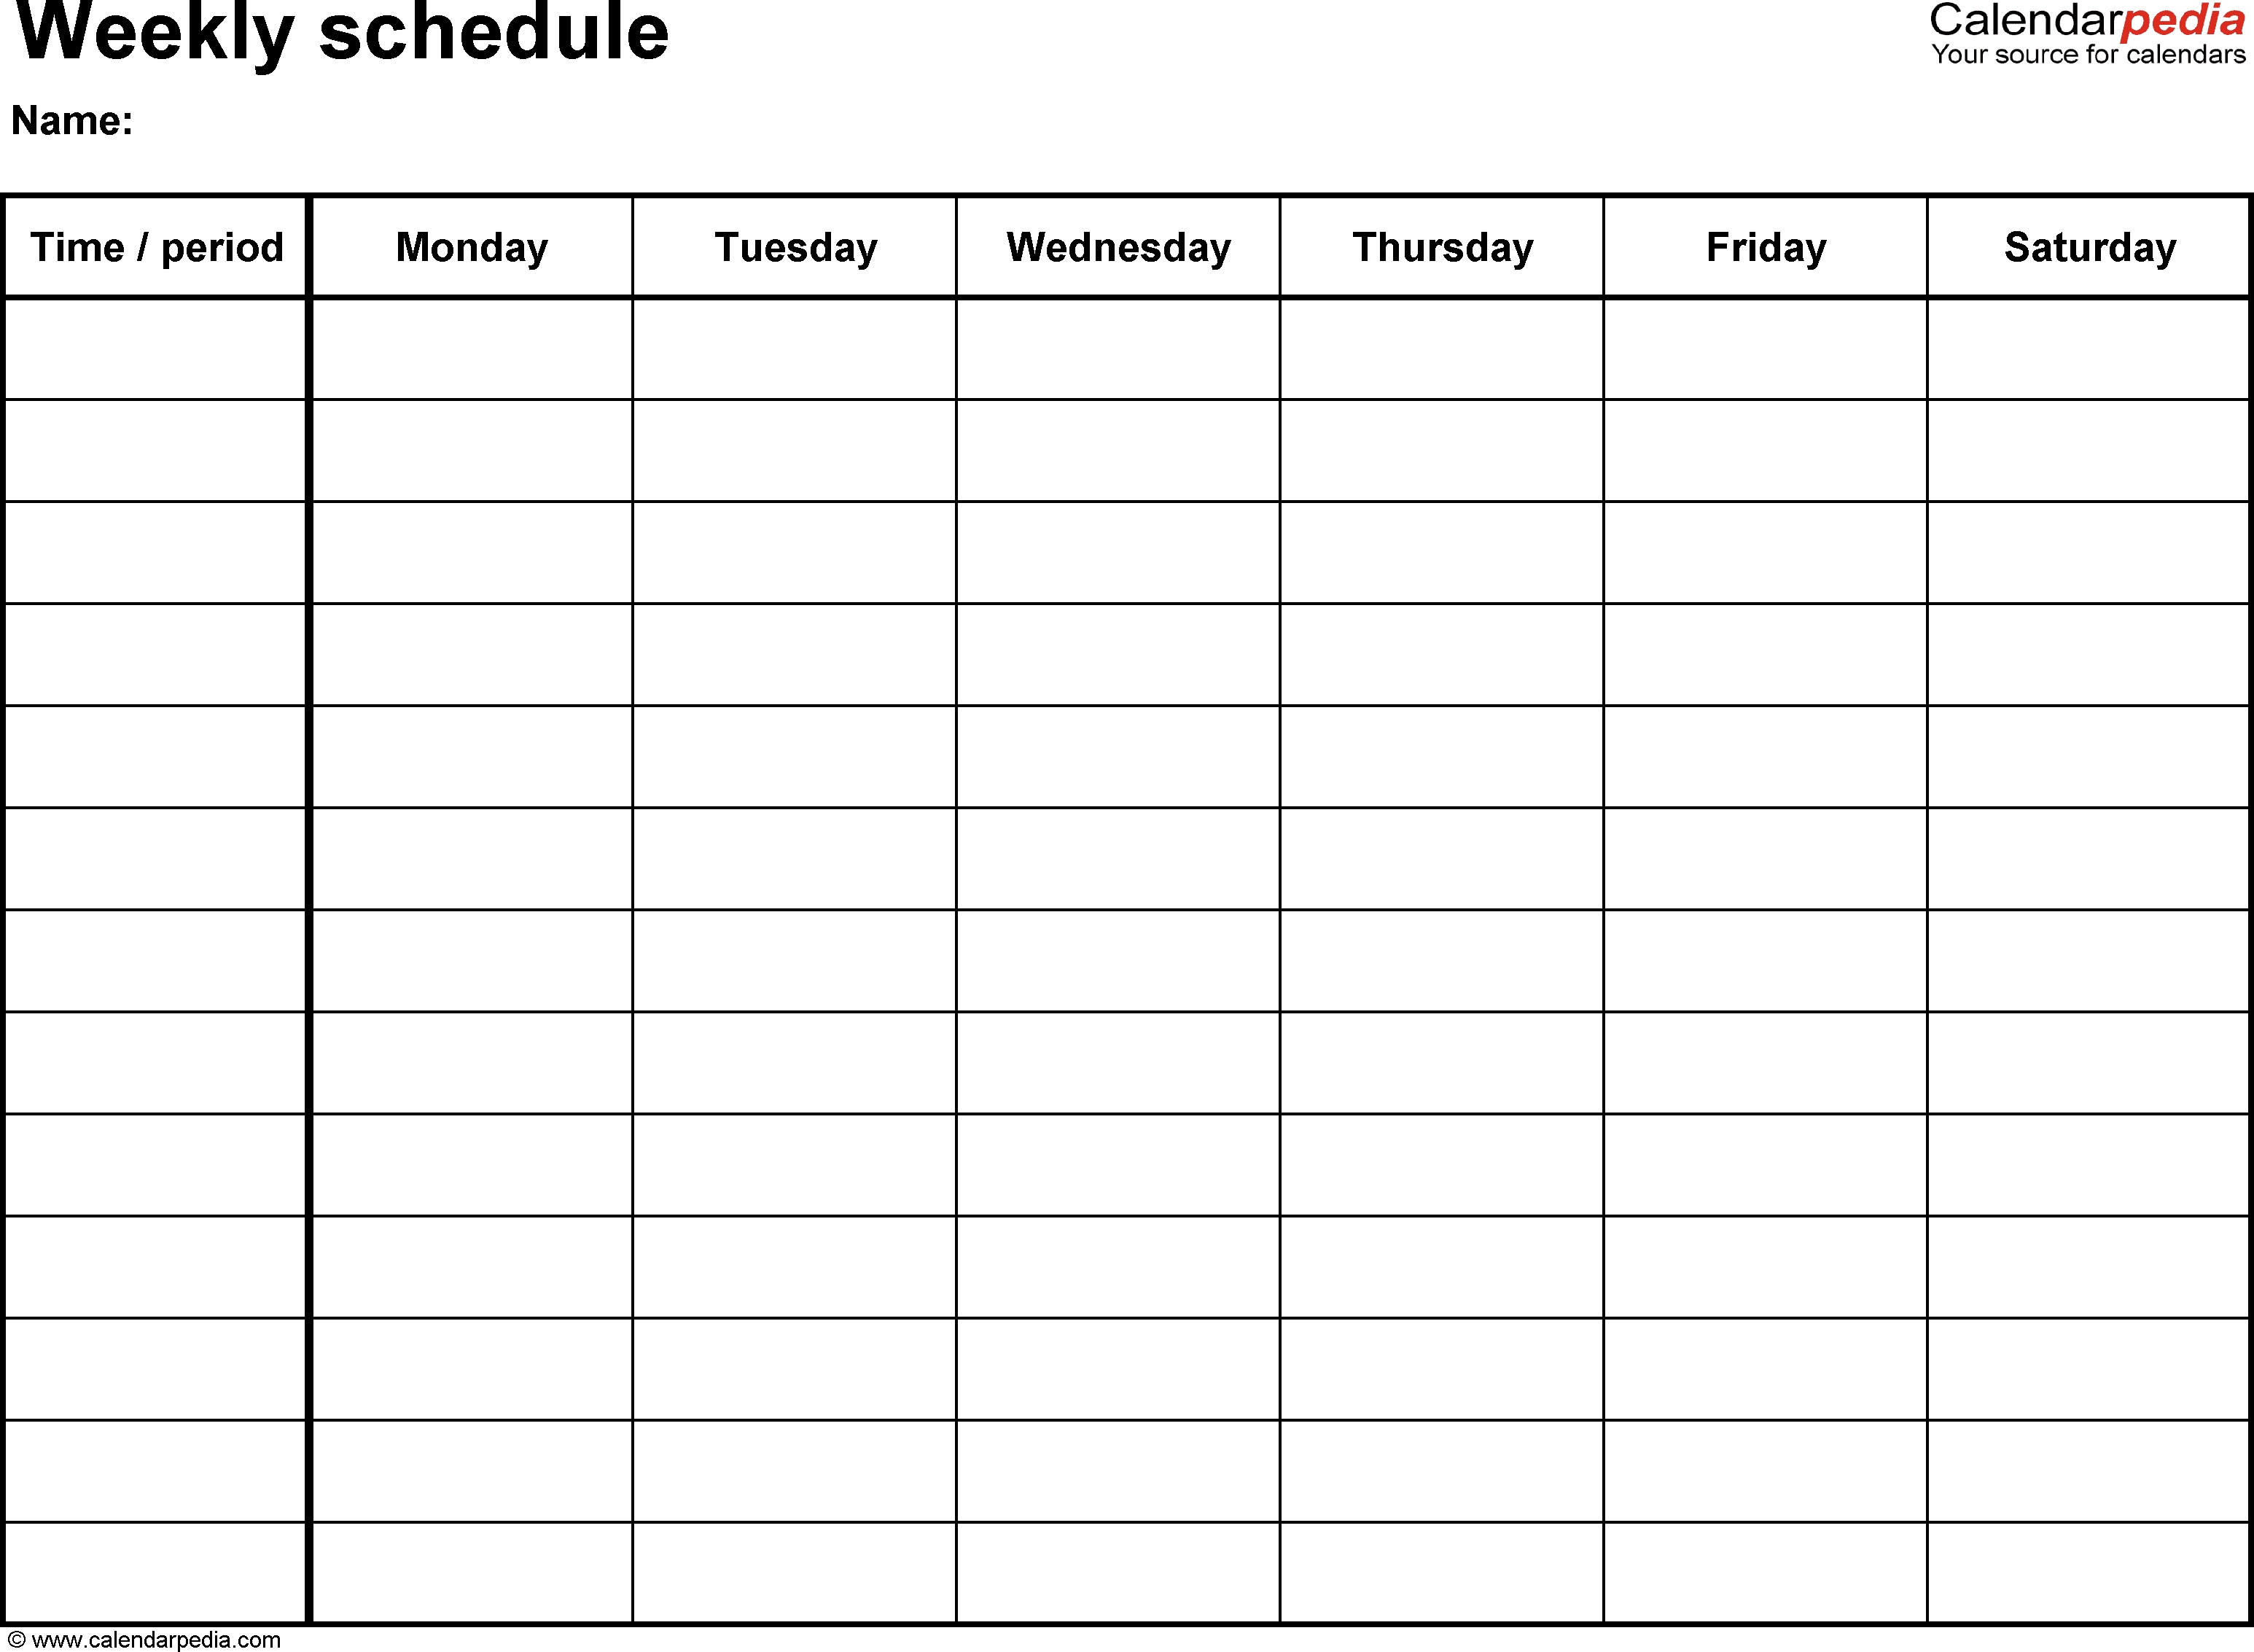 Free Weekly Schedule Templates For Pdf - 18 Templates within Printable Weekly Planner Calendar Template